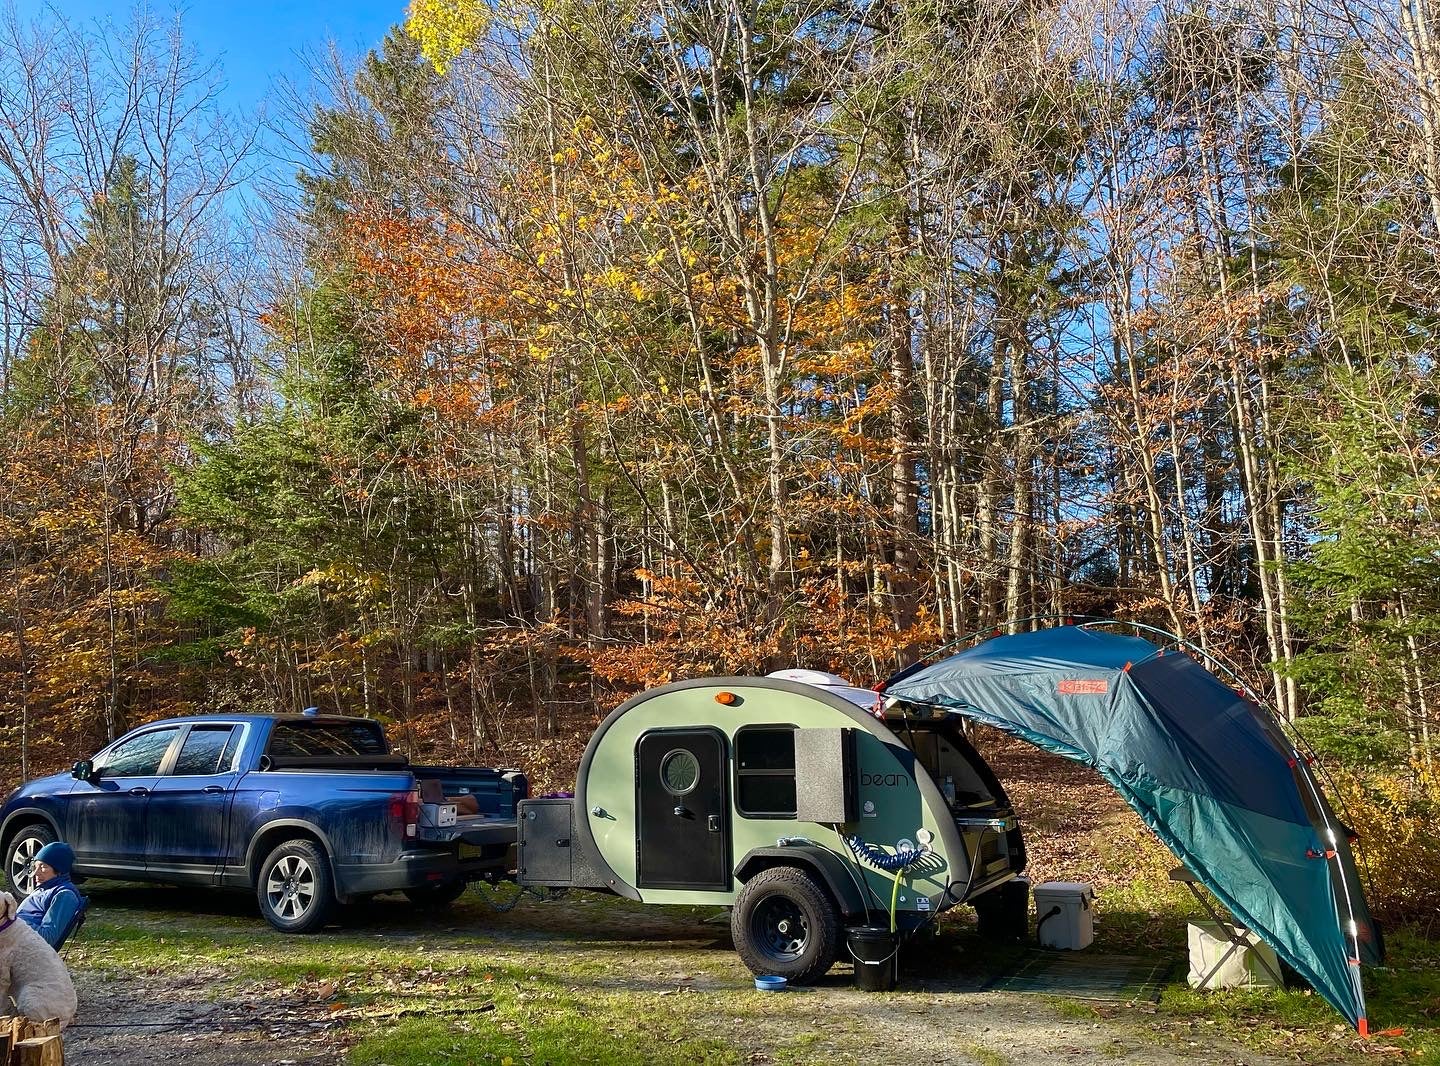 Camper submitted image from Statton Pond Camp on Forest Road 71 - 2